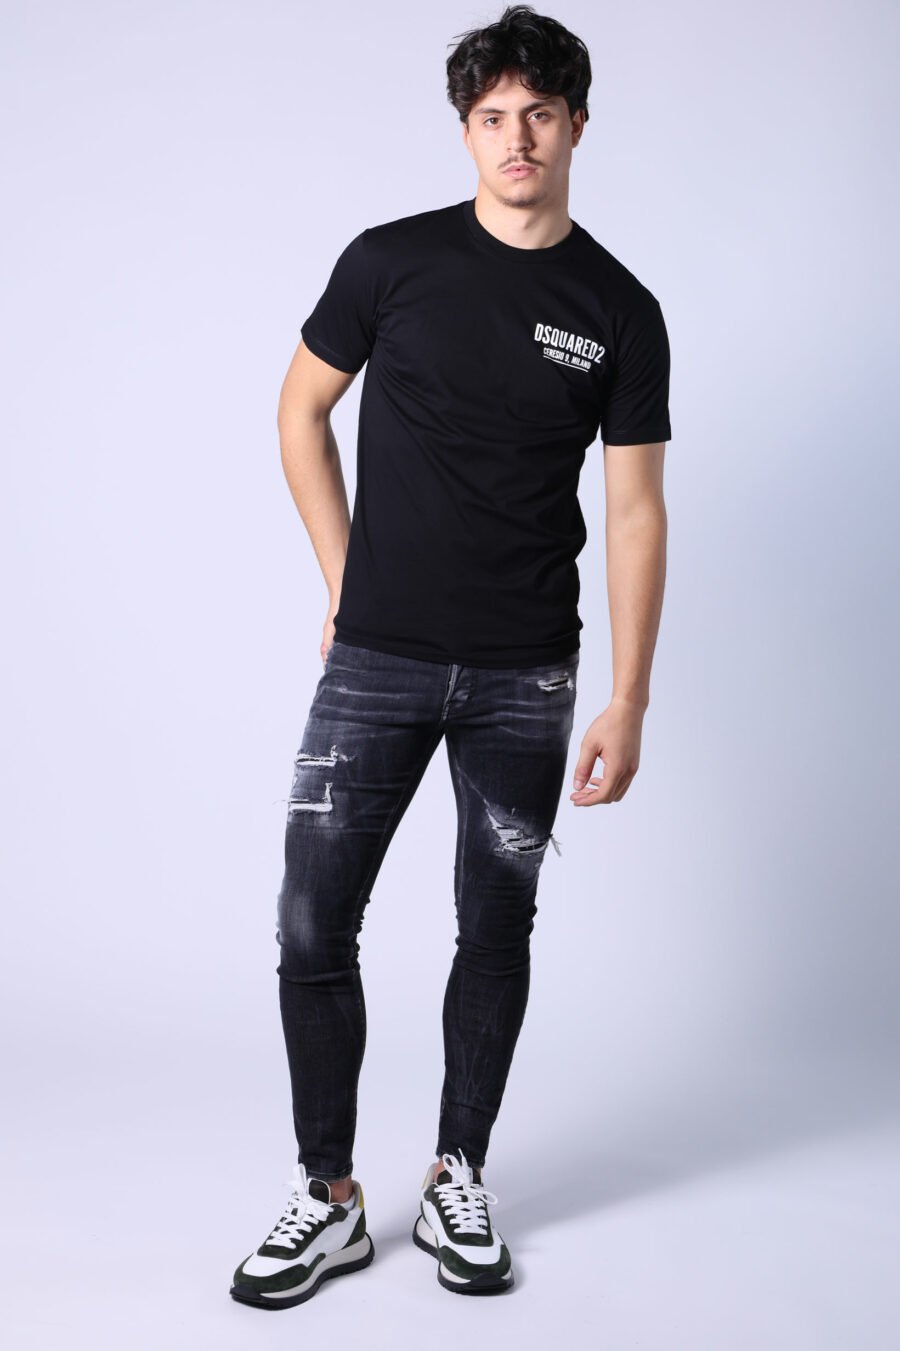 Skater jean trousers black with rips and semi-worn - Untitled Catalog 05318